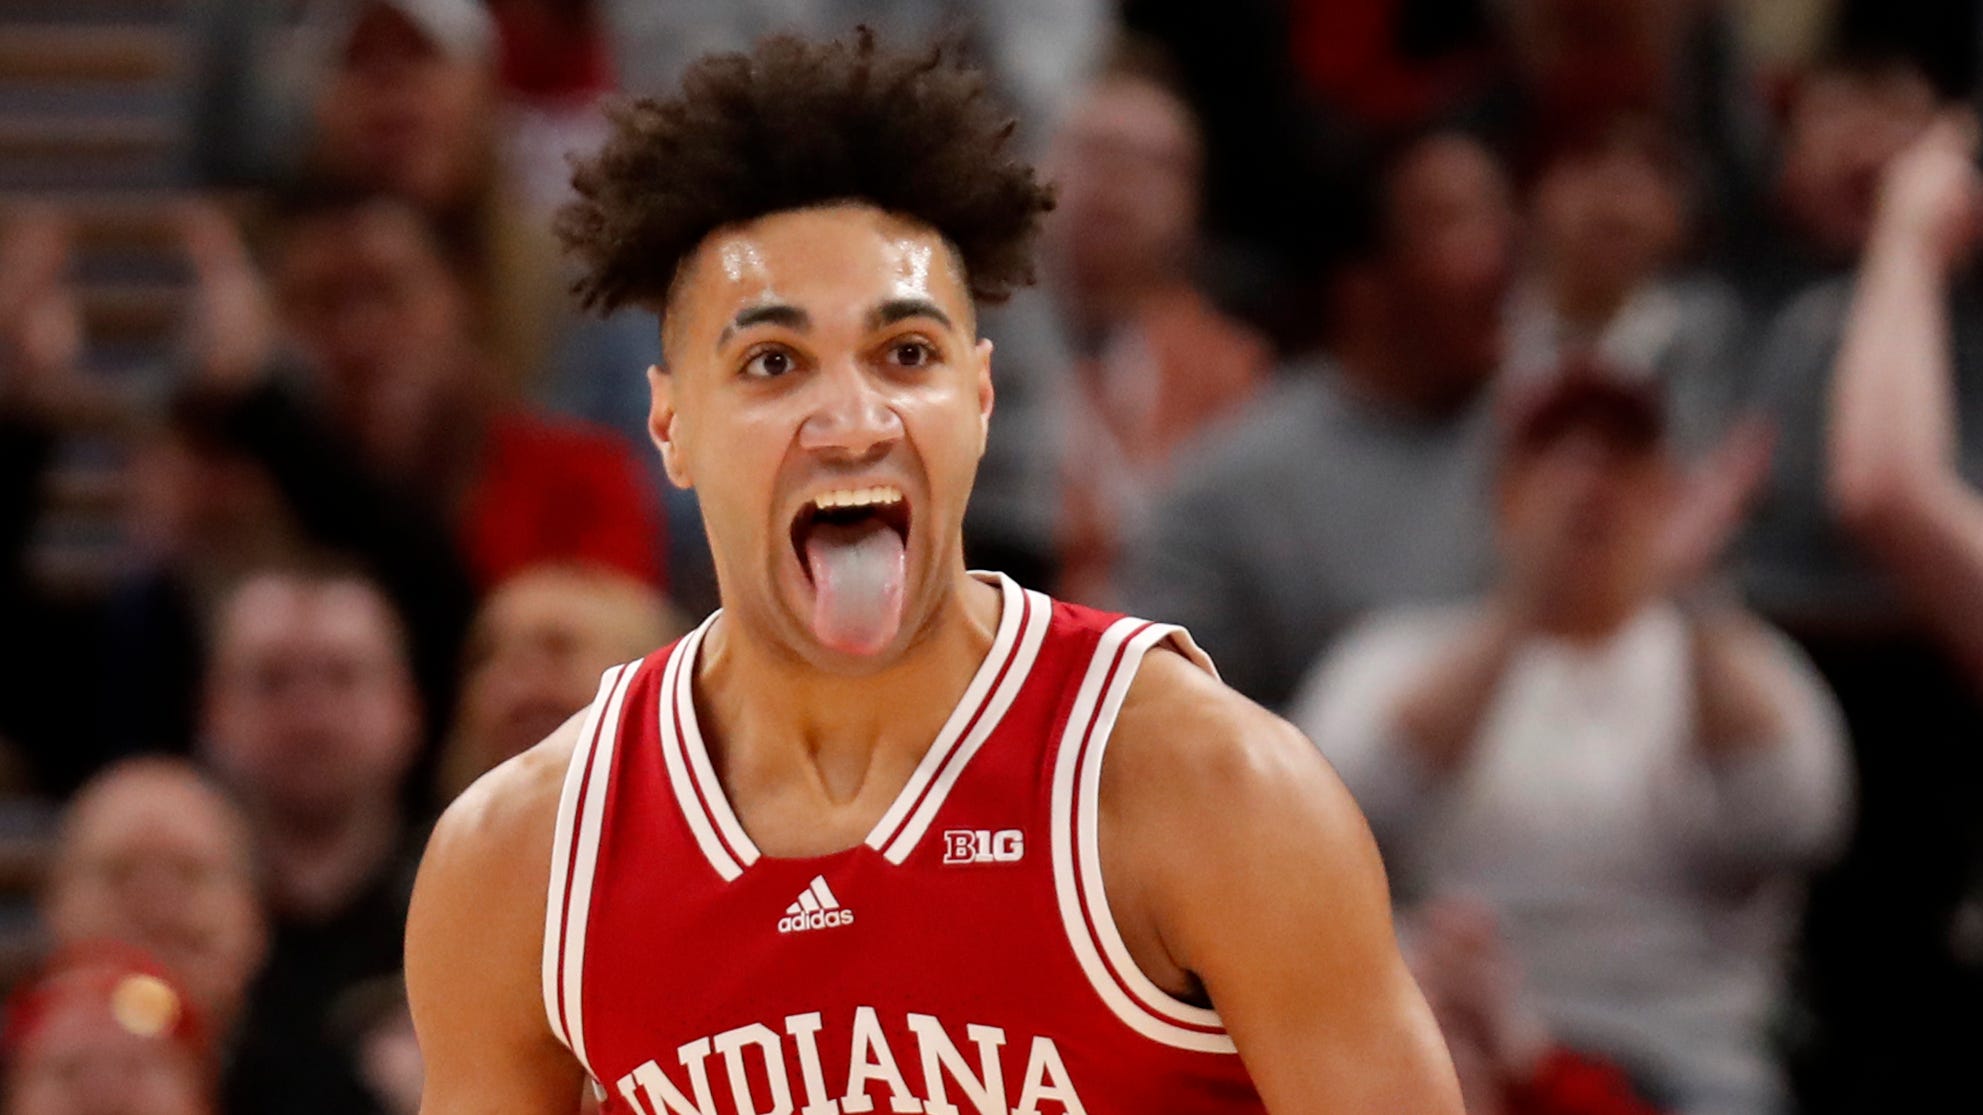 Indiana basketball schedule for 2022-23 includes two games vs. Purdue